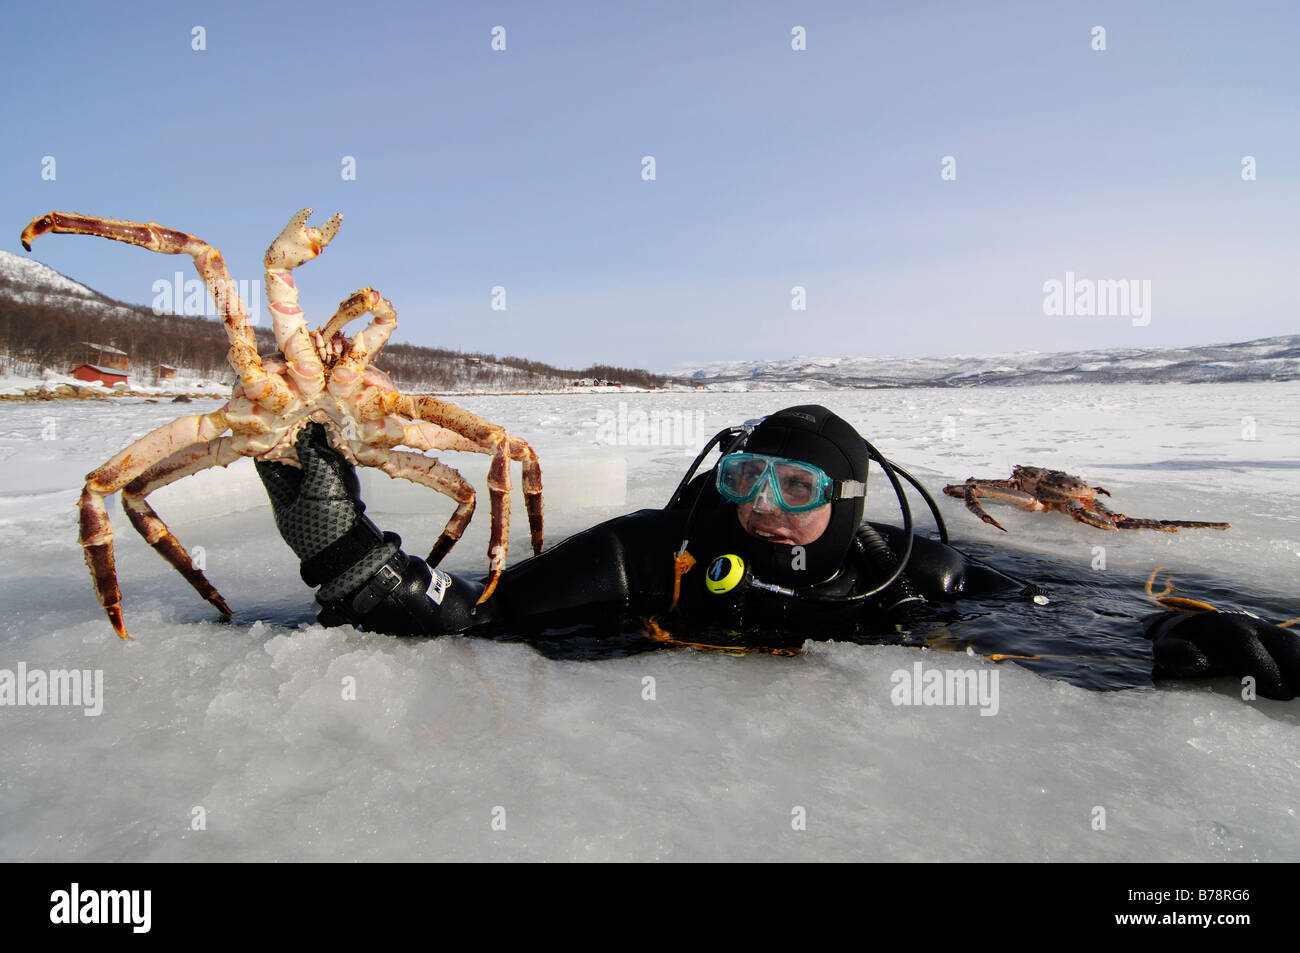 Scuba diver in Fjord with catch of red king crab, Kirkenes, Norway, Scandinavia, Europe Stock Photo